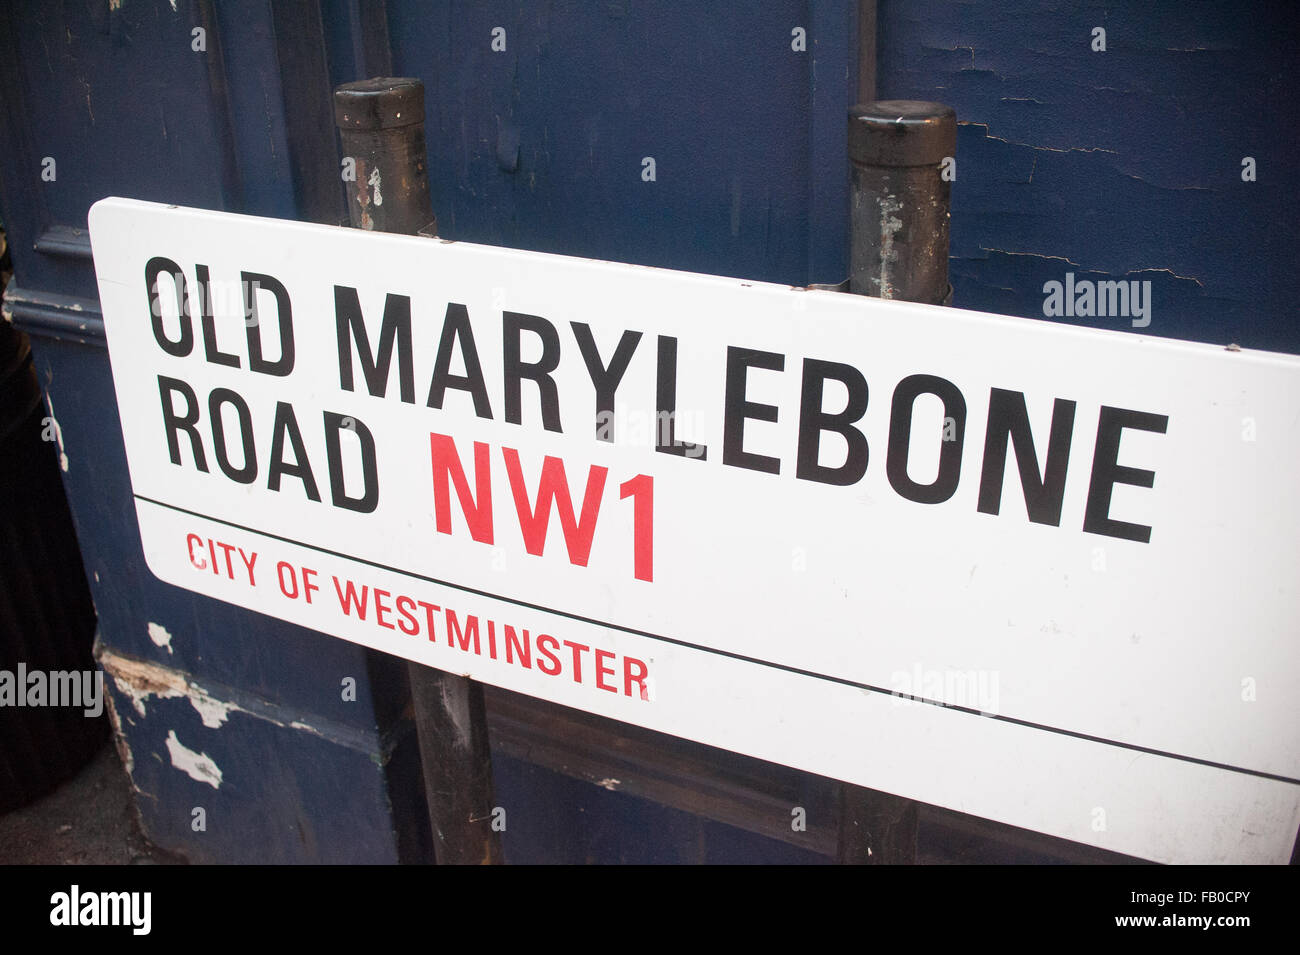 Old Marylebone Road NW1 street sign in City of Westminster, London. Stock Photo